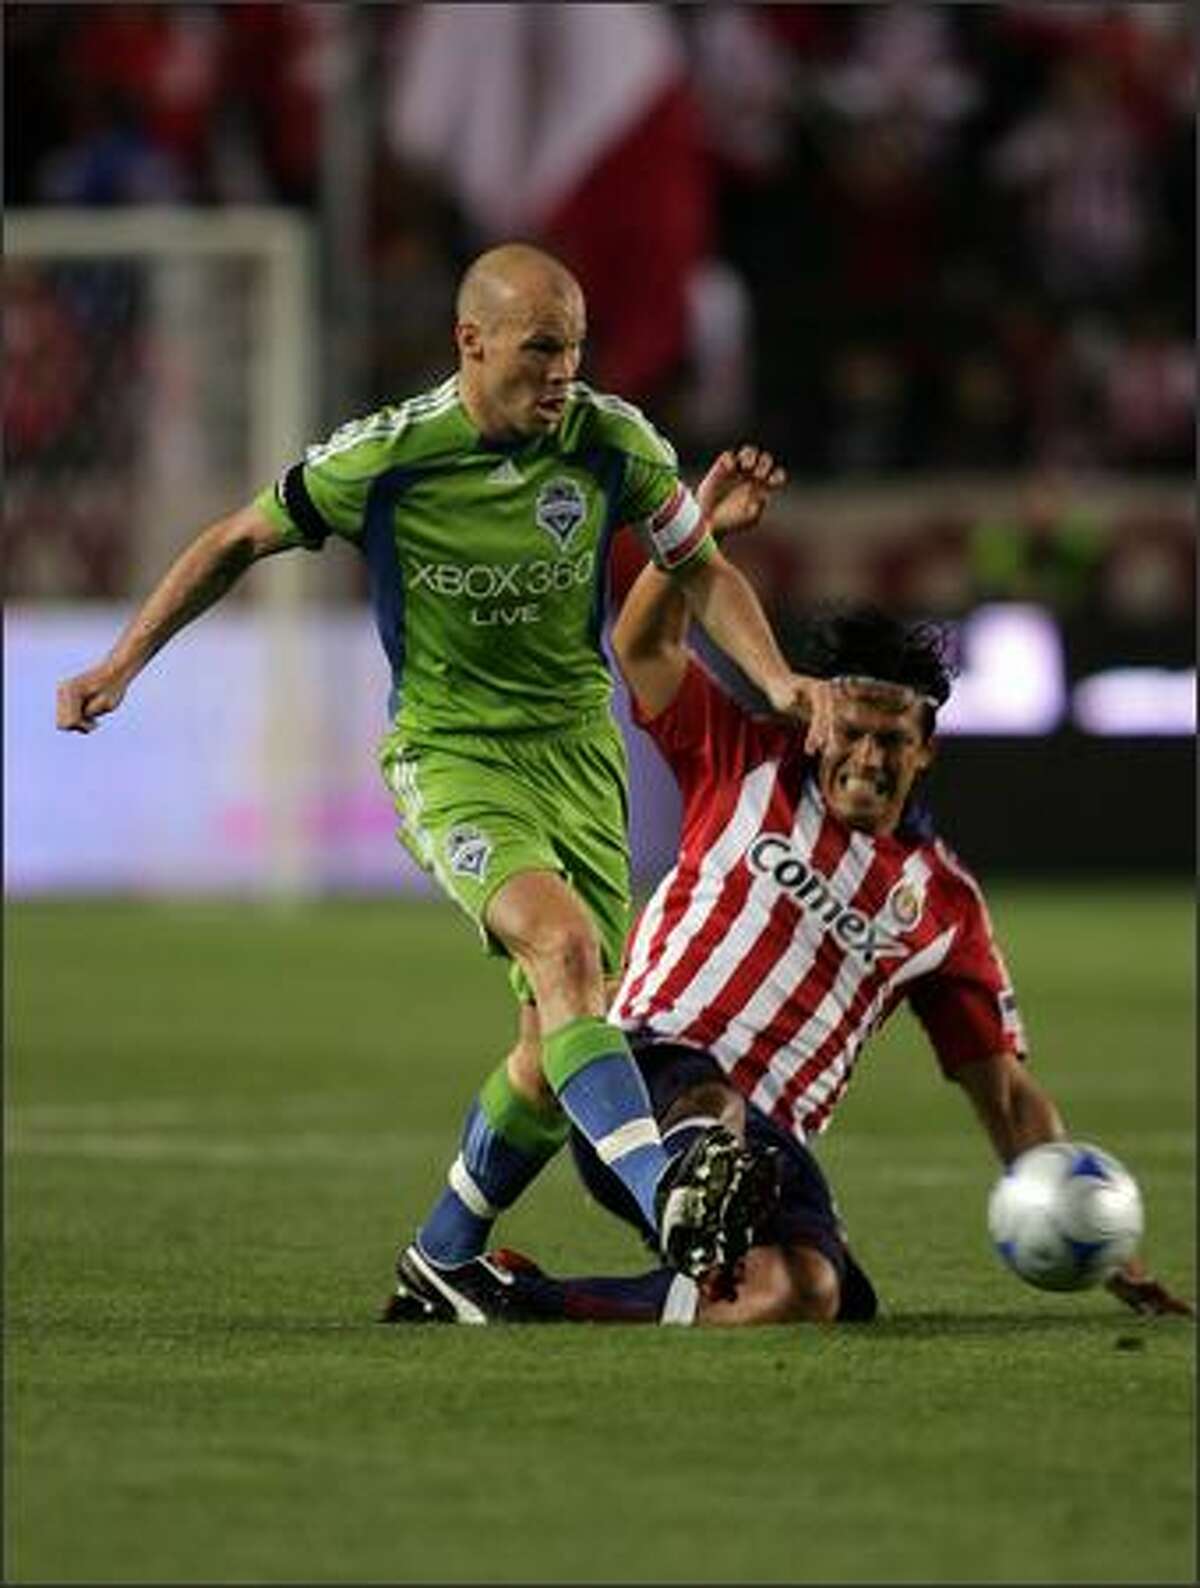 Freddie Ljungberg of Seattle Sounders FC gets off a pass as Eduardo Lillingston of Chivas USA slides in for the tackle in the first half during an MLS match at The Home Depot Center in Carson, Calif., on Saturday, April 18, 2009.